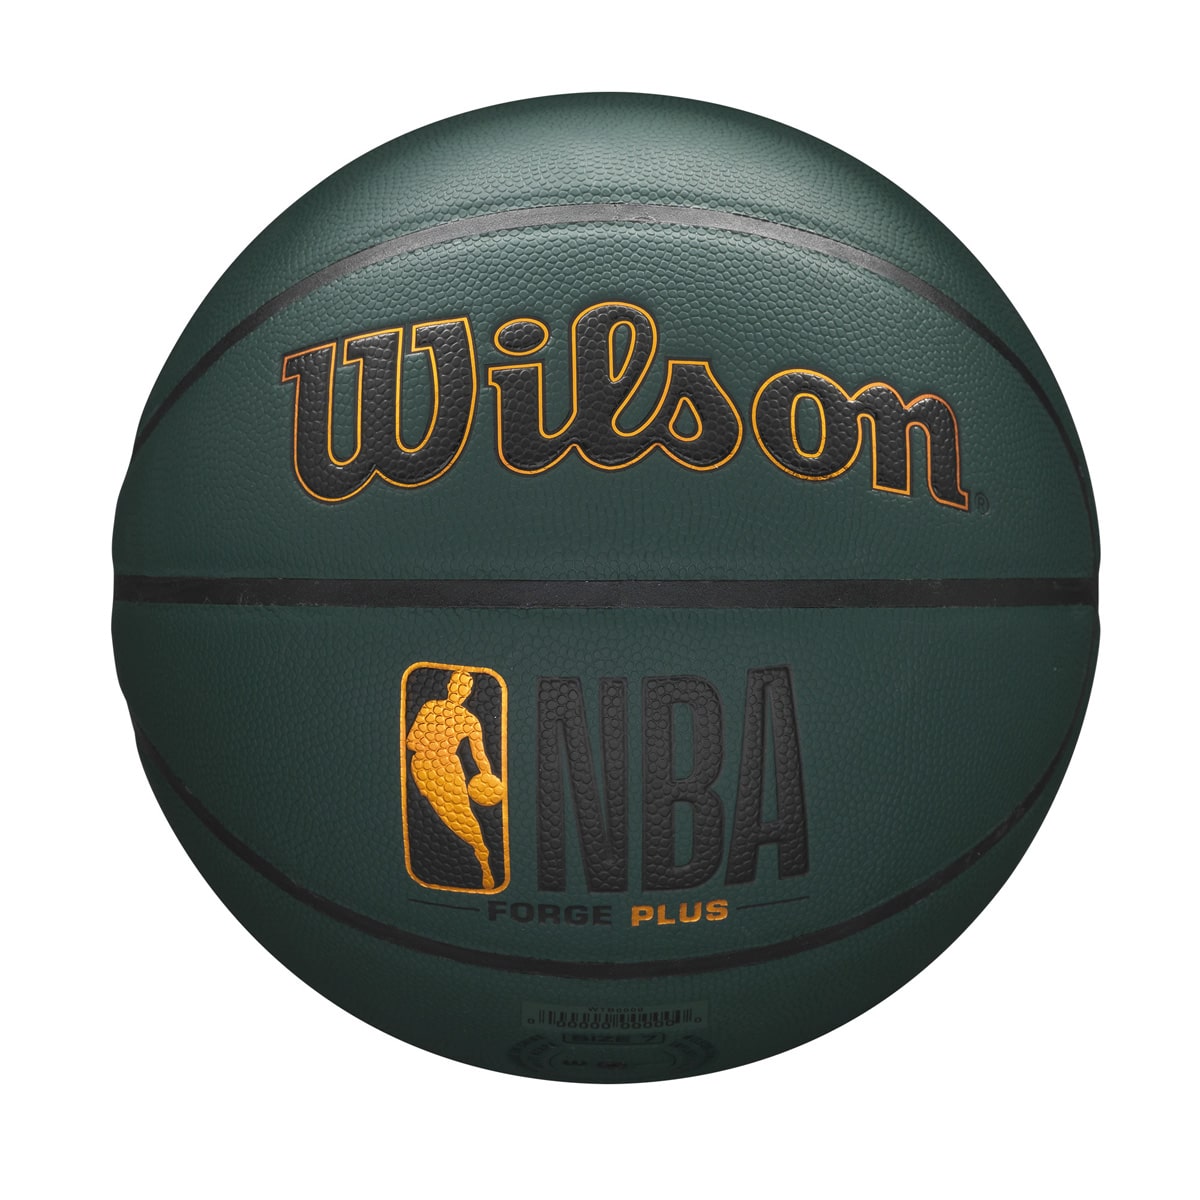 WTB8103EC_6_7_07_NBA_Forge_Plus_ForestGreen.png.high-res-min